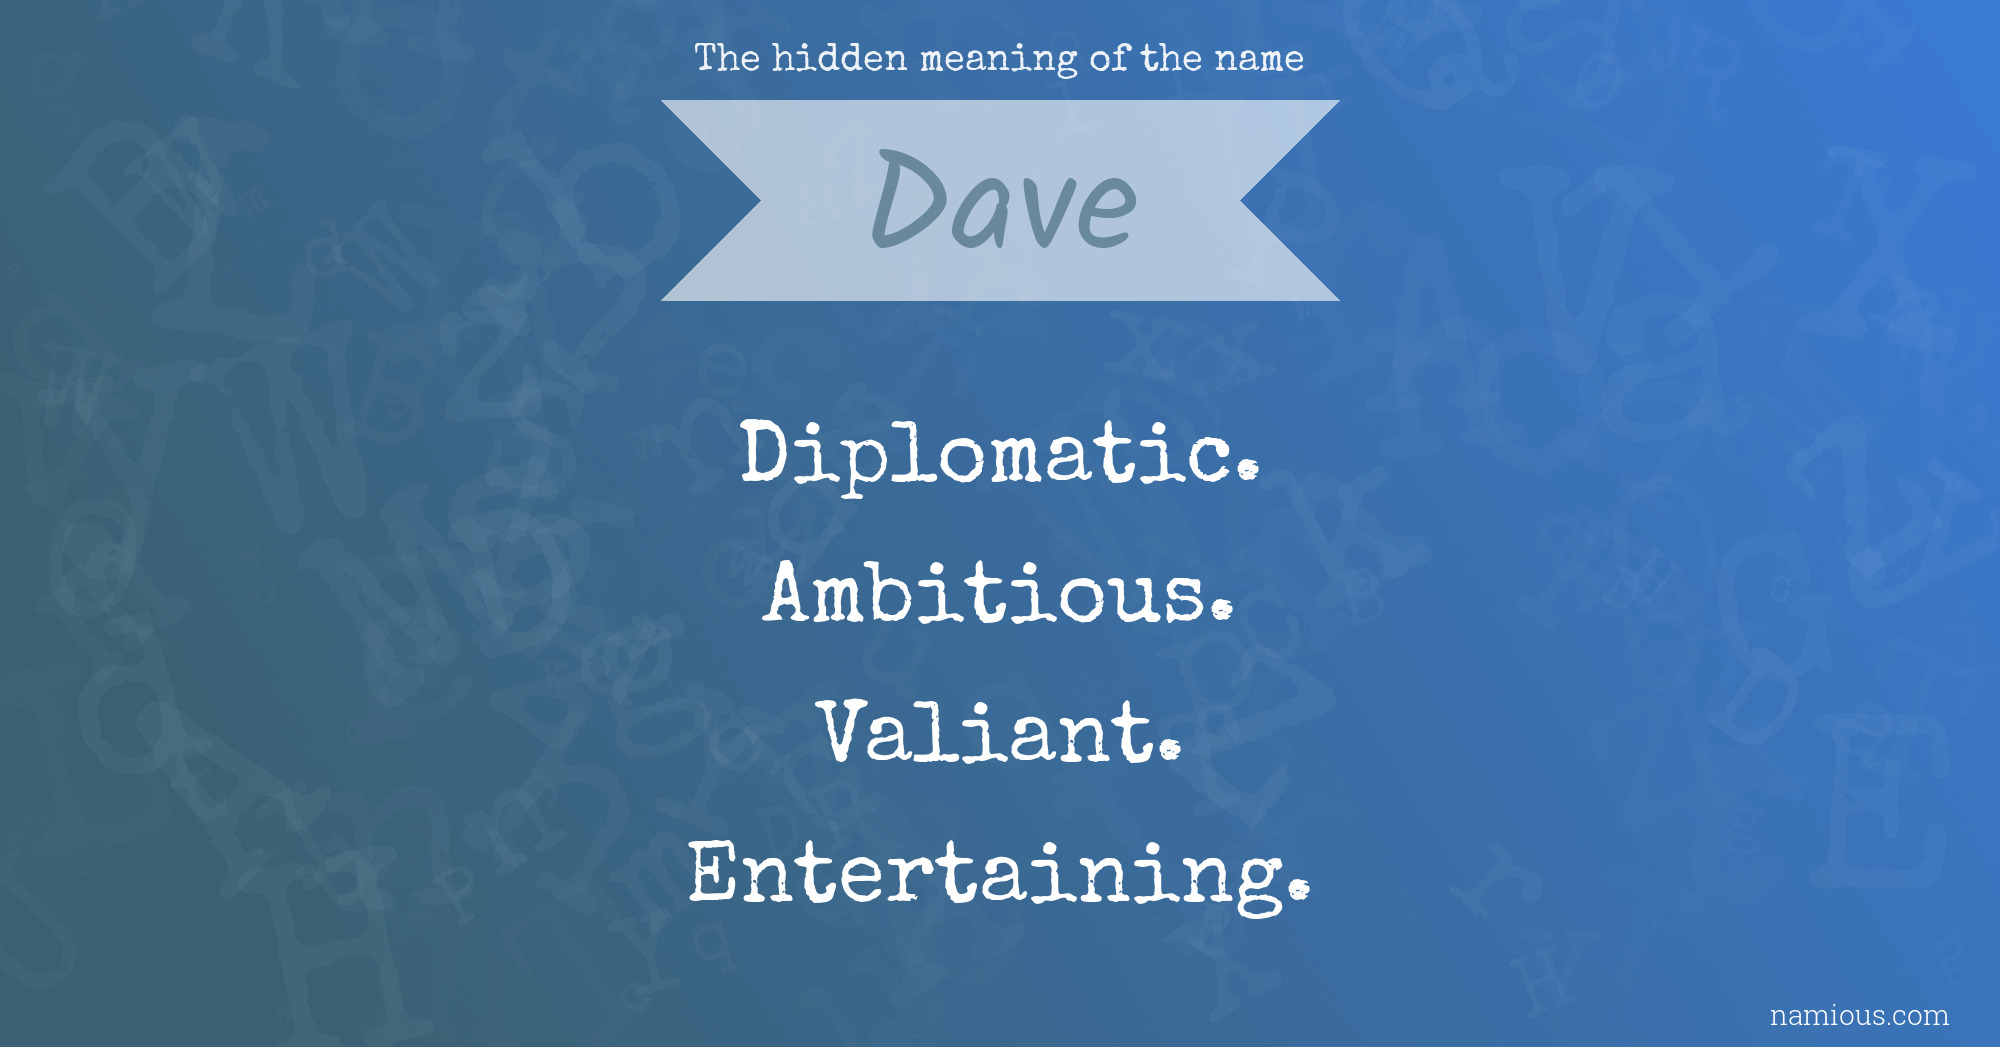 The hidden meaning of the name Dave